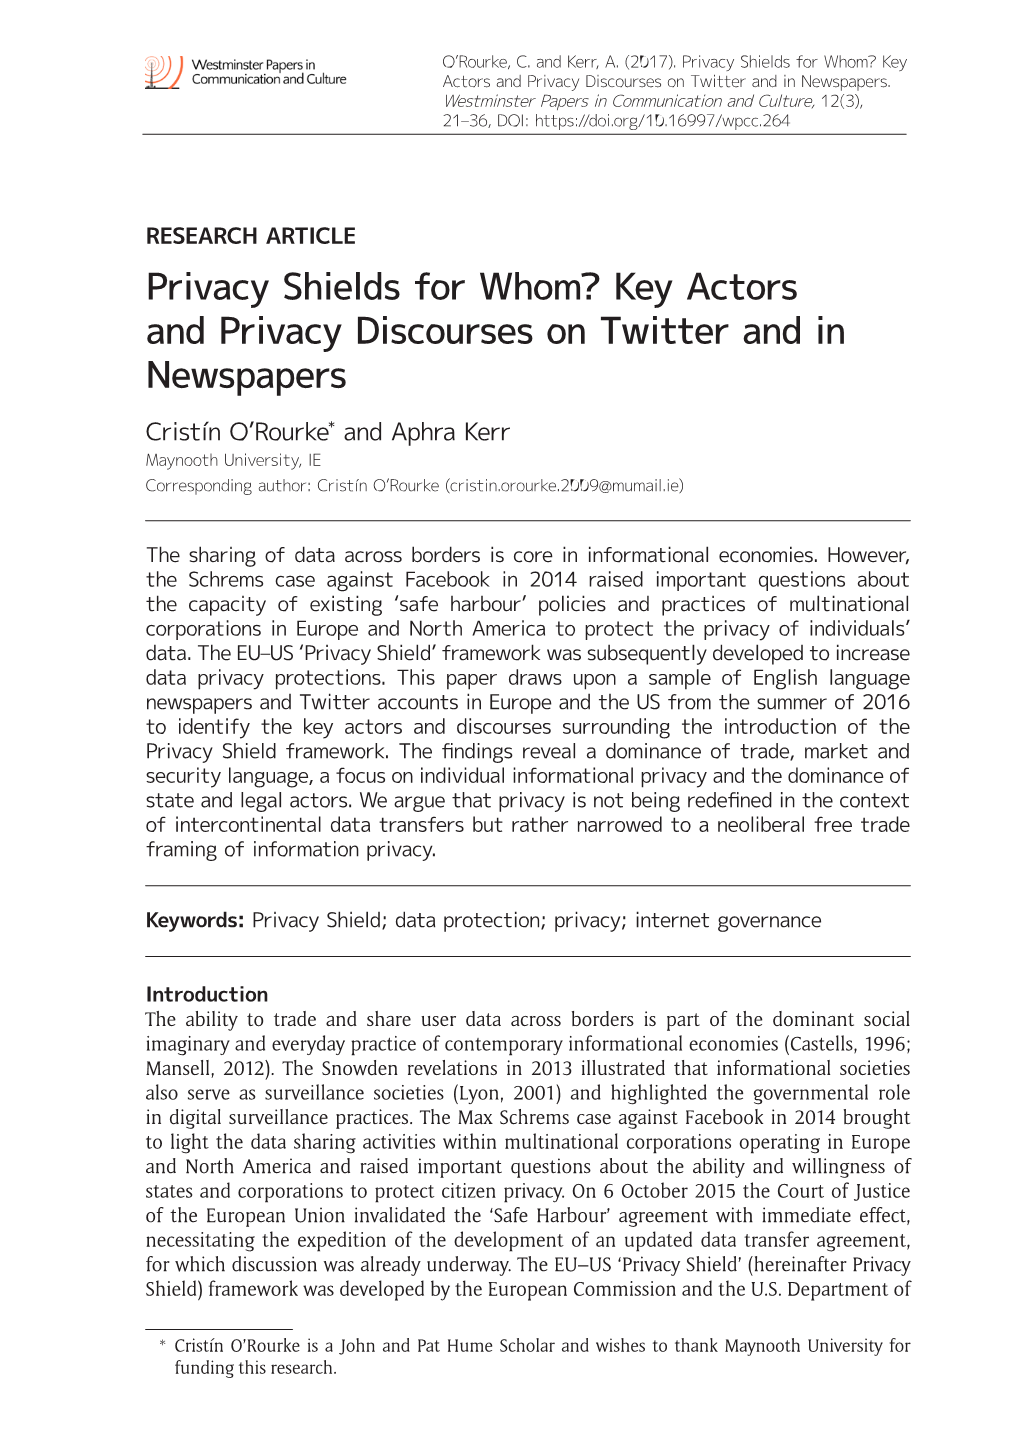 Privacy Shields for Whom? Key Actors and Privacy Discourses on Twitter and in Newspapers